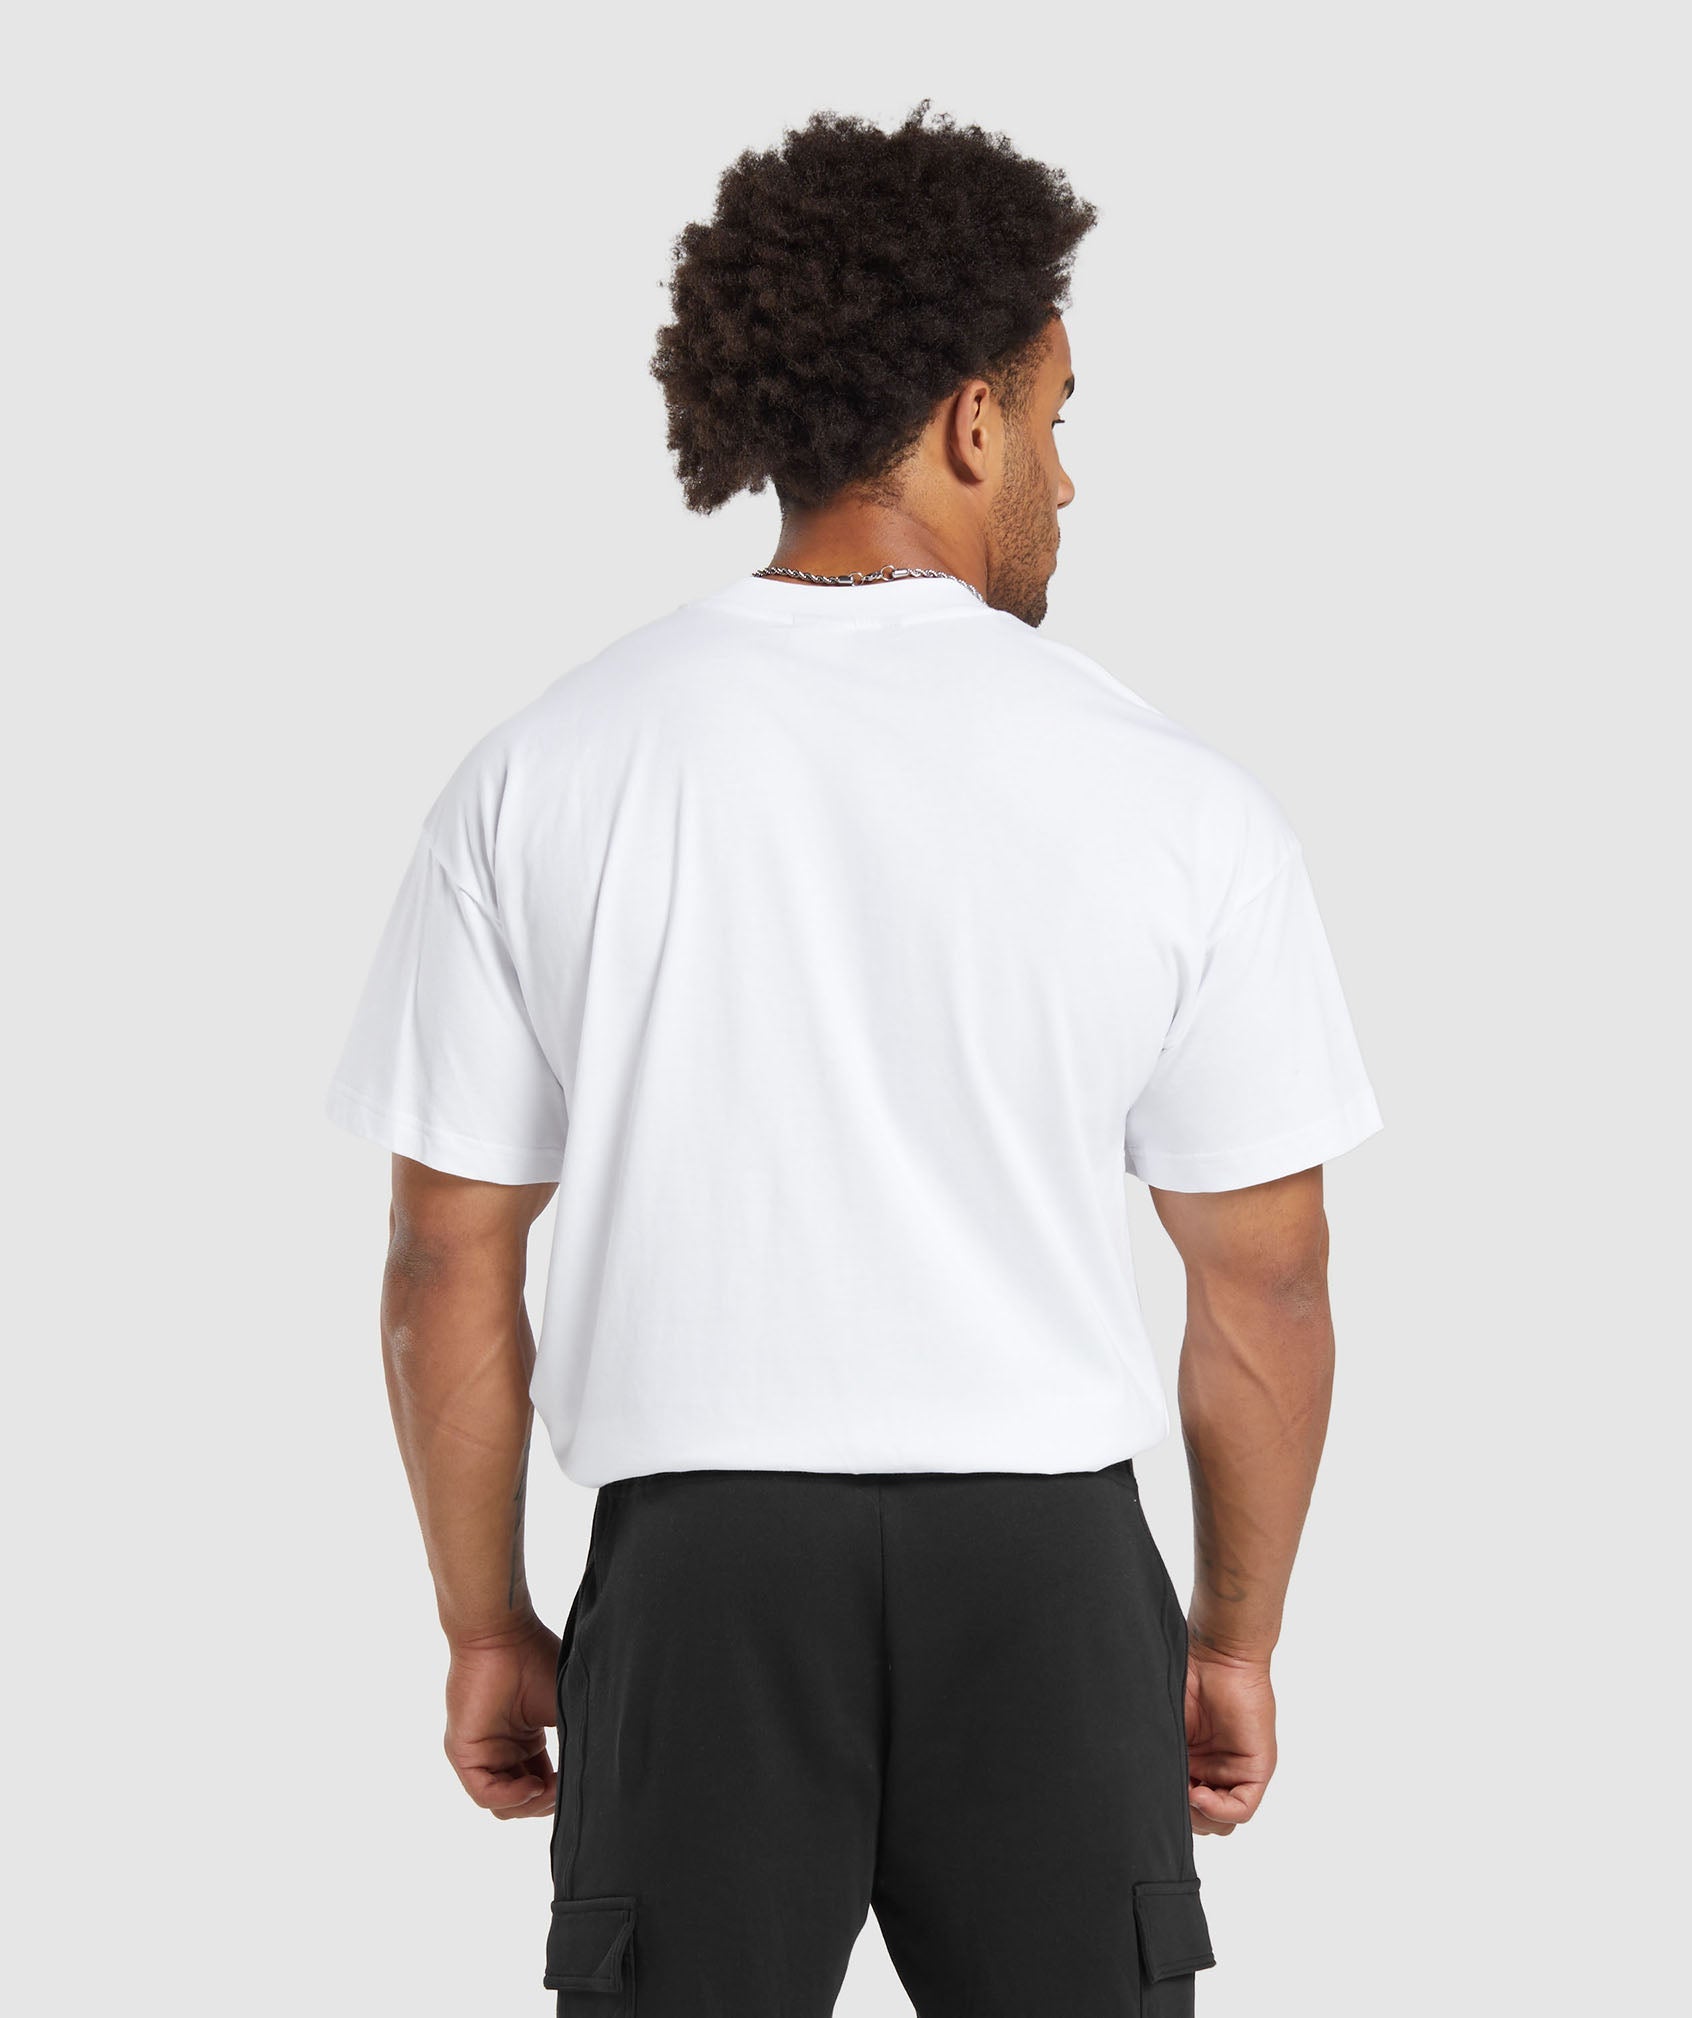 Lifting Apparel T-Shirt in White - view 2